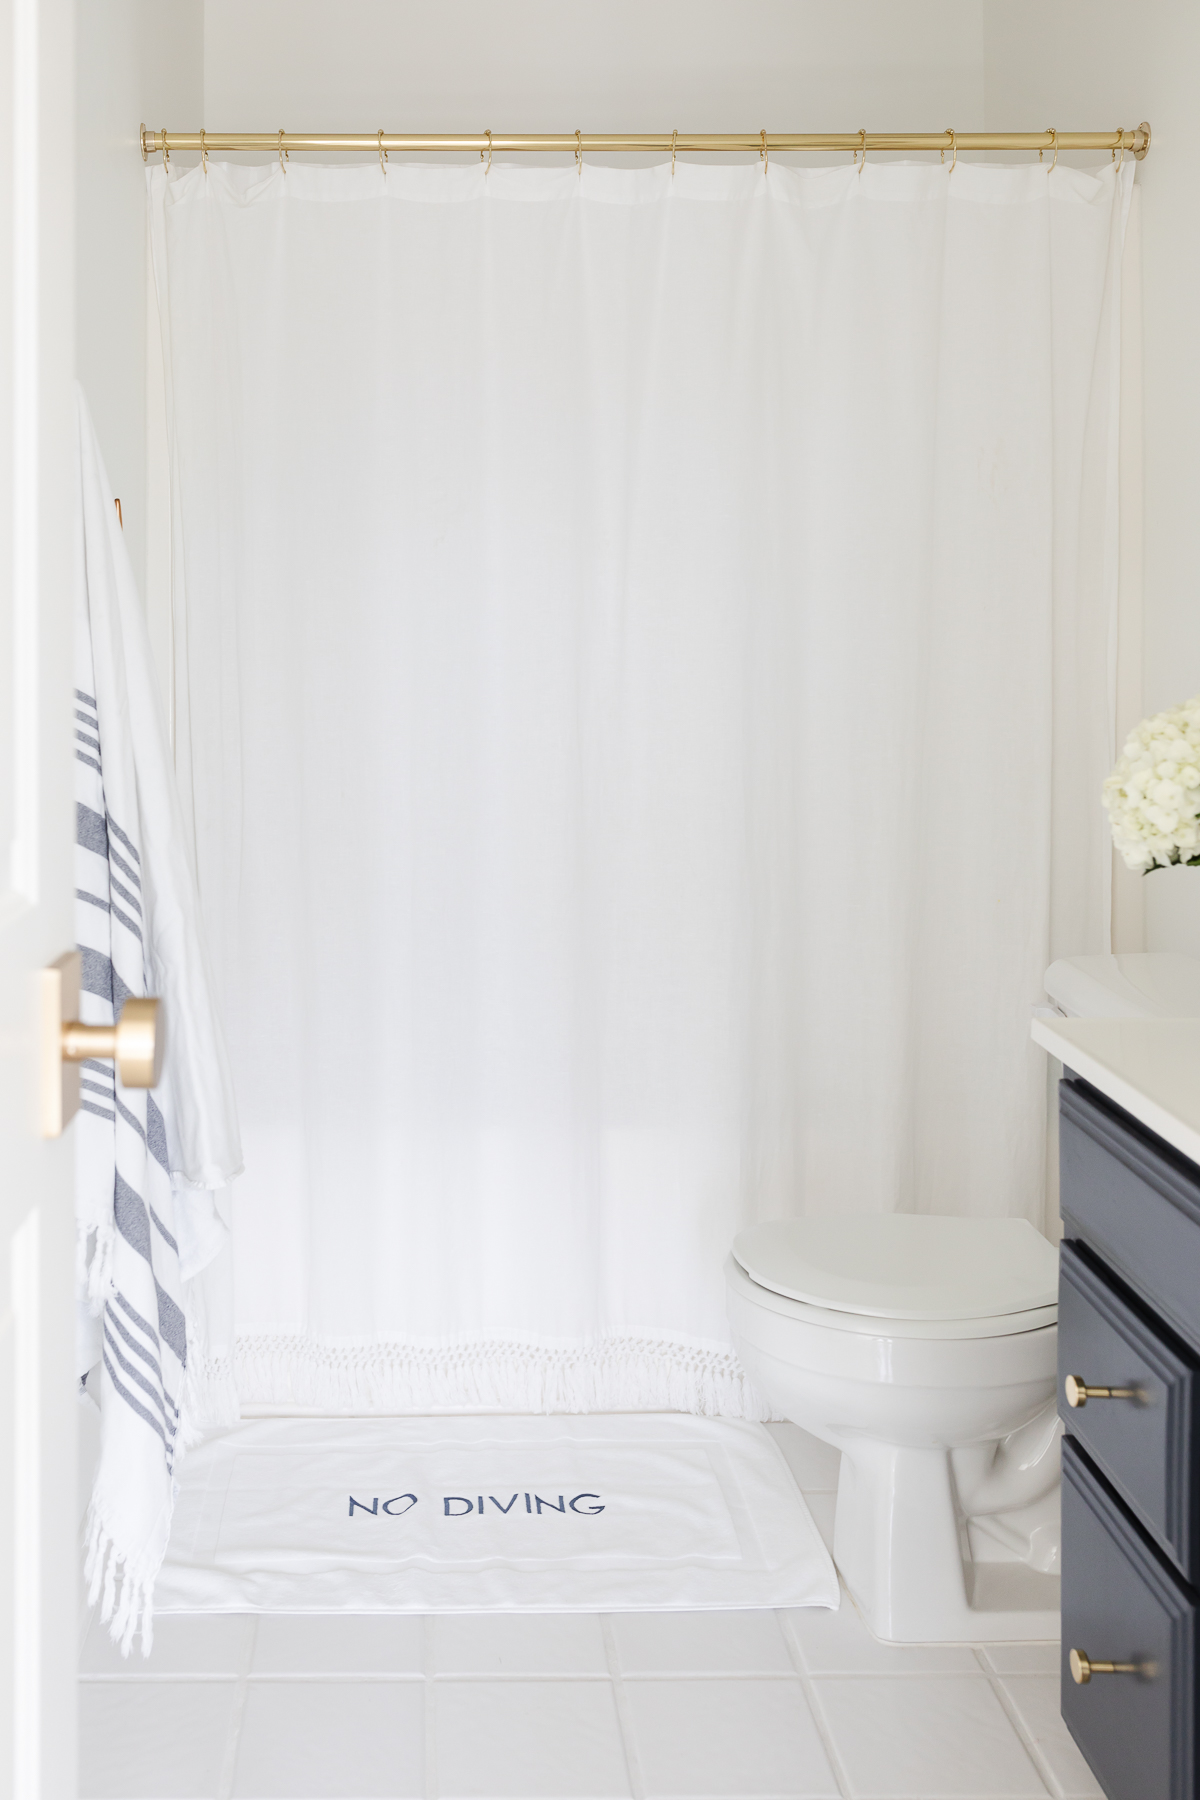 A white bathroom with a navy painted vanity and a gold shower curtain rod with a white tasseled curtain.